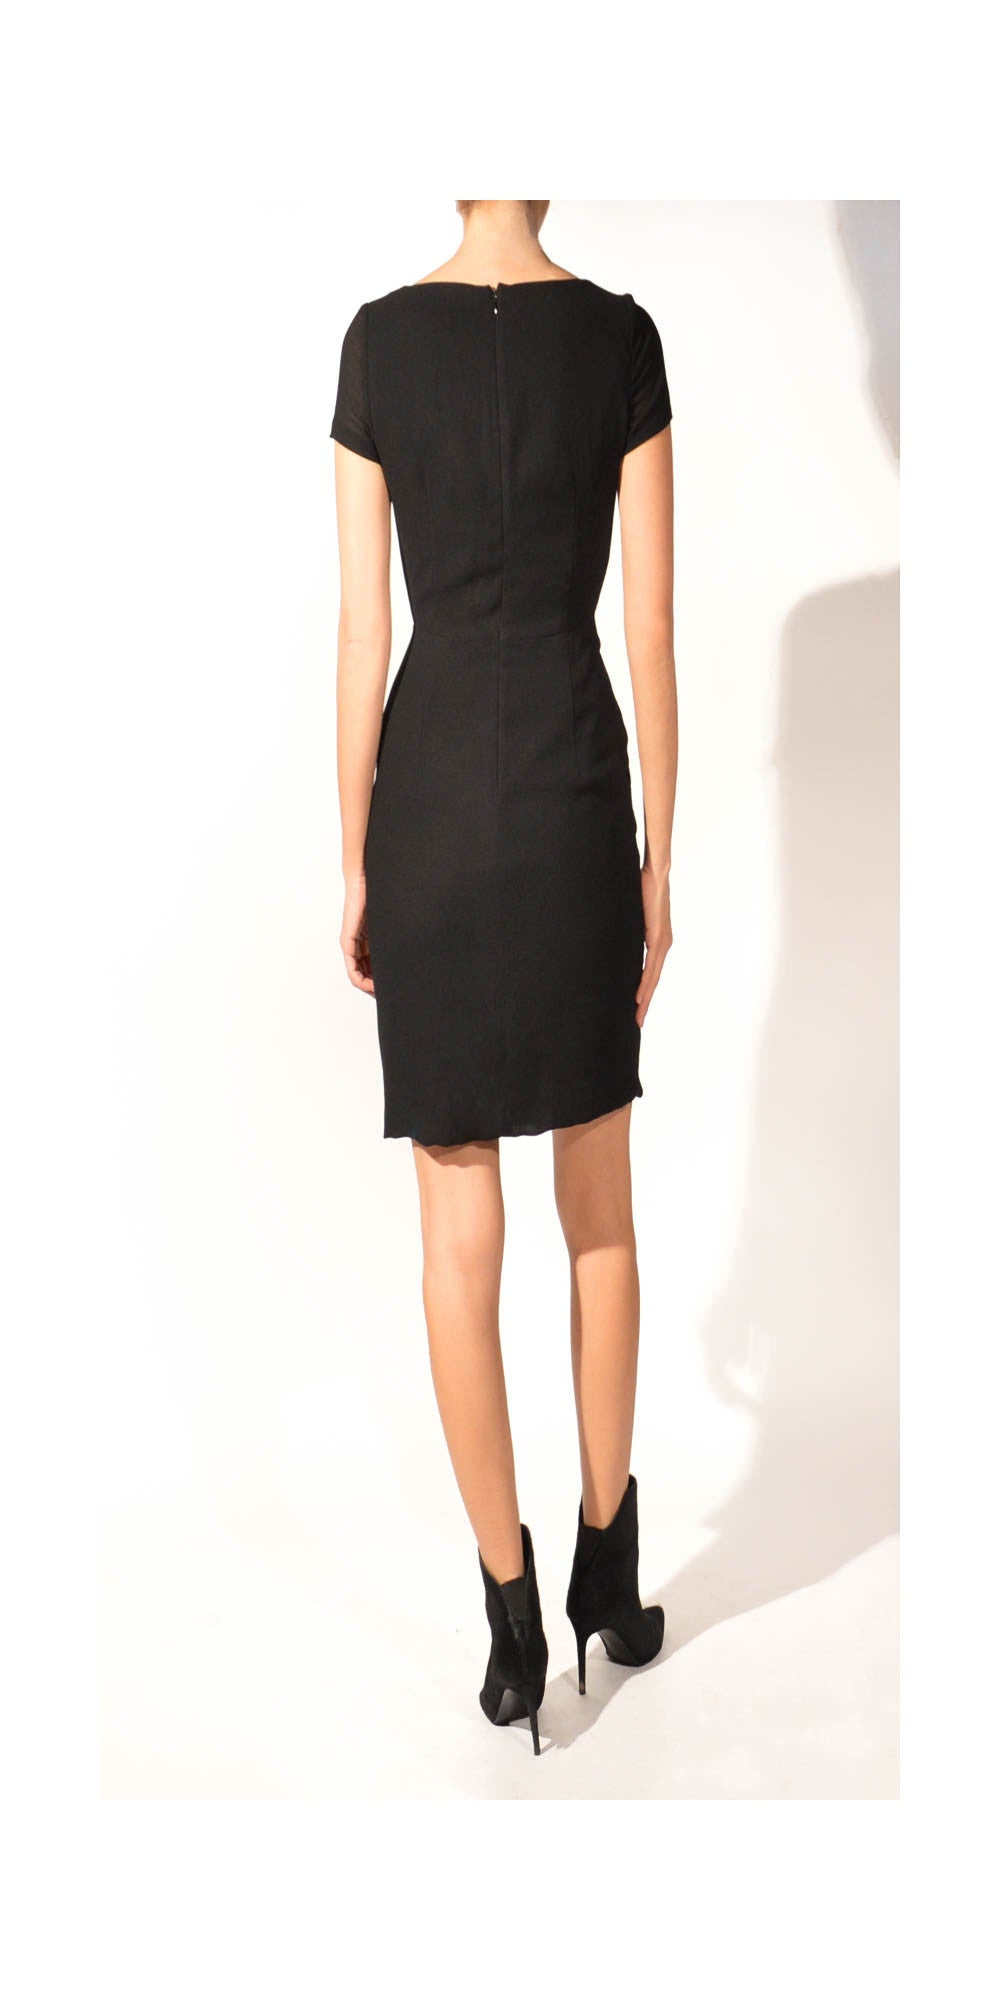 Theory Black Dress with Cap Sleeves: Size 2